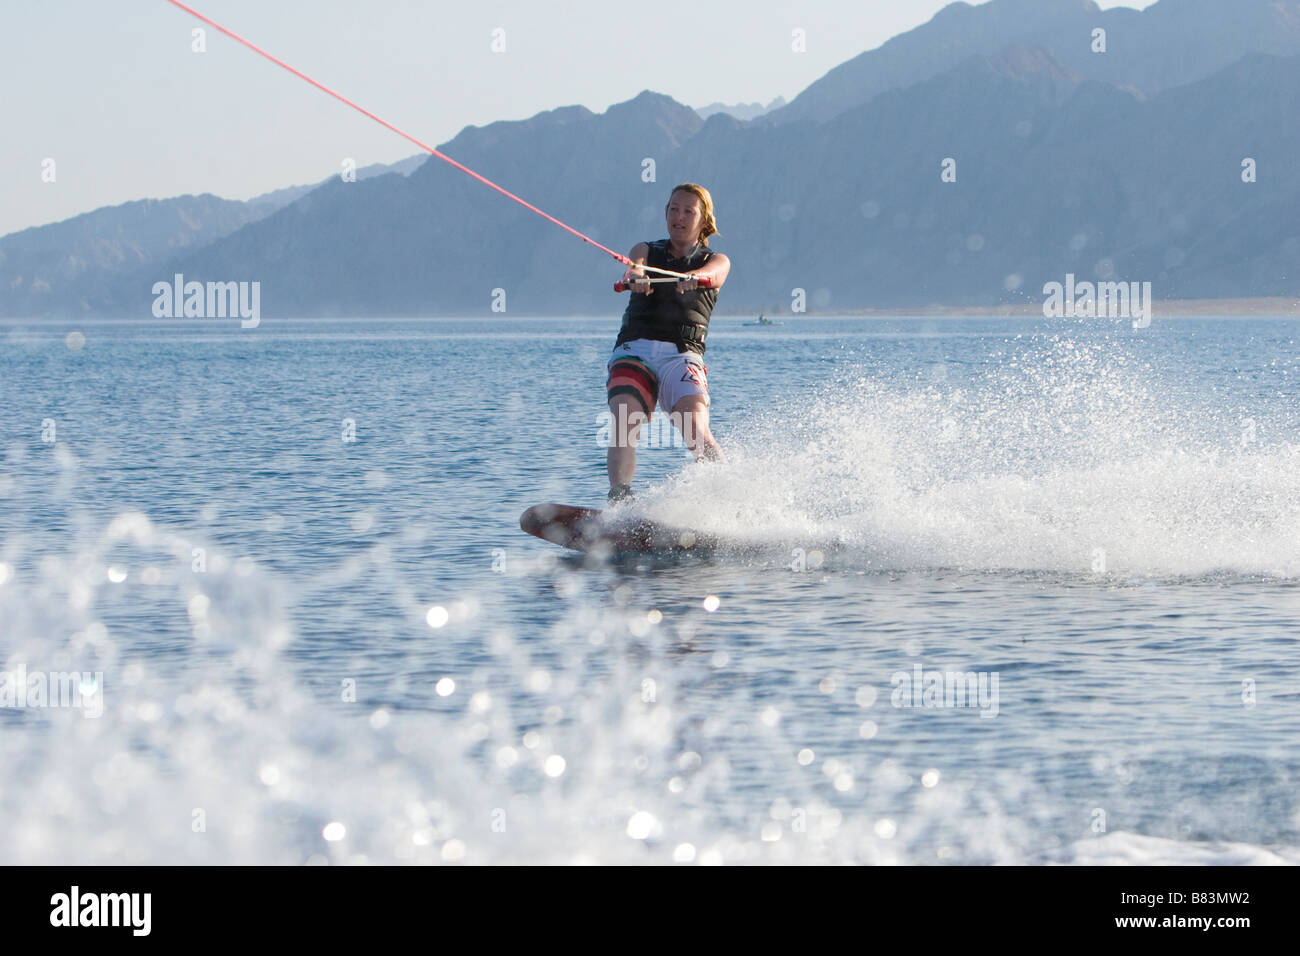 A wakeboarder enjoys the flat water while being towed behind a motor boat in Laguna Bay in the Sinai resort of Dahab in Egypt Stock Photo